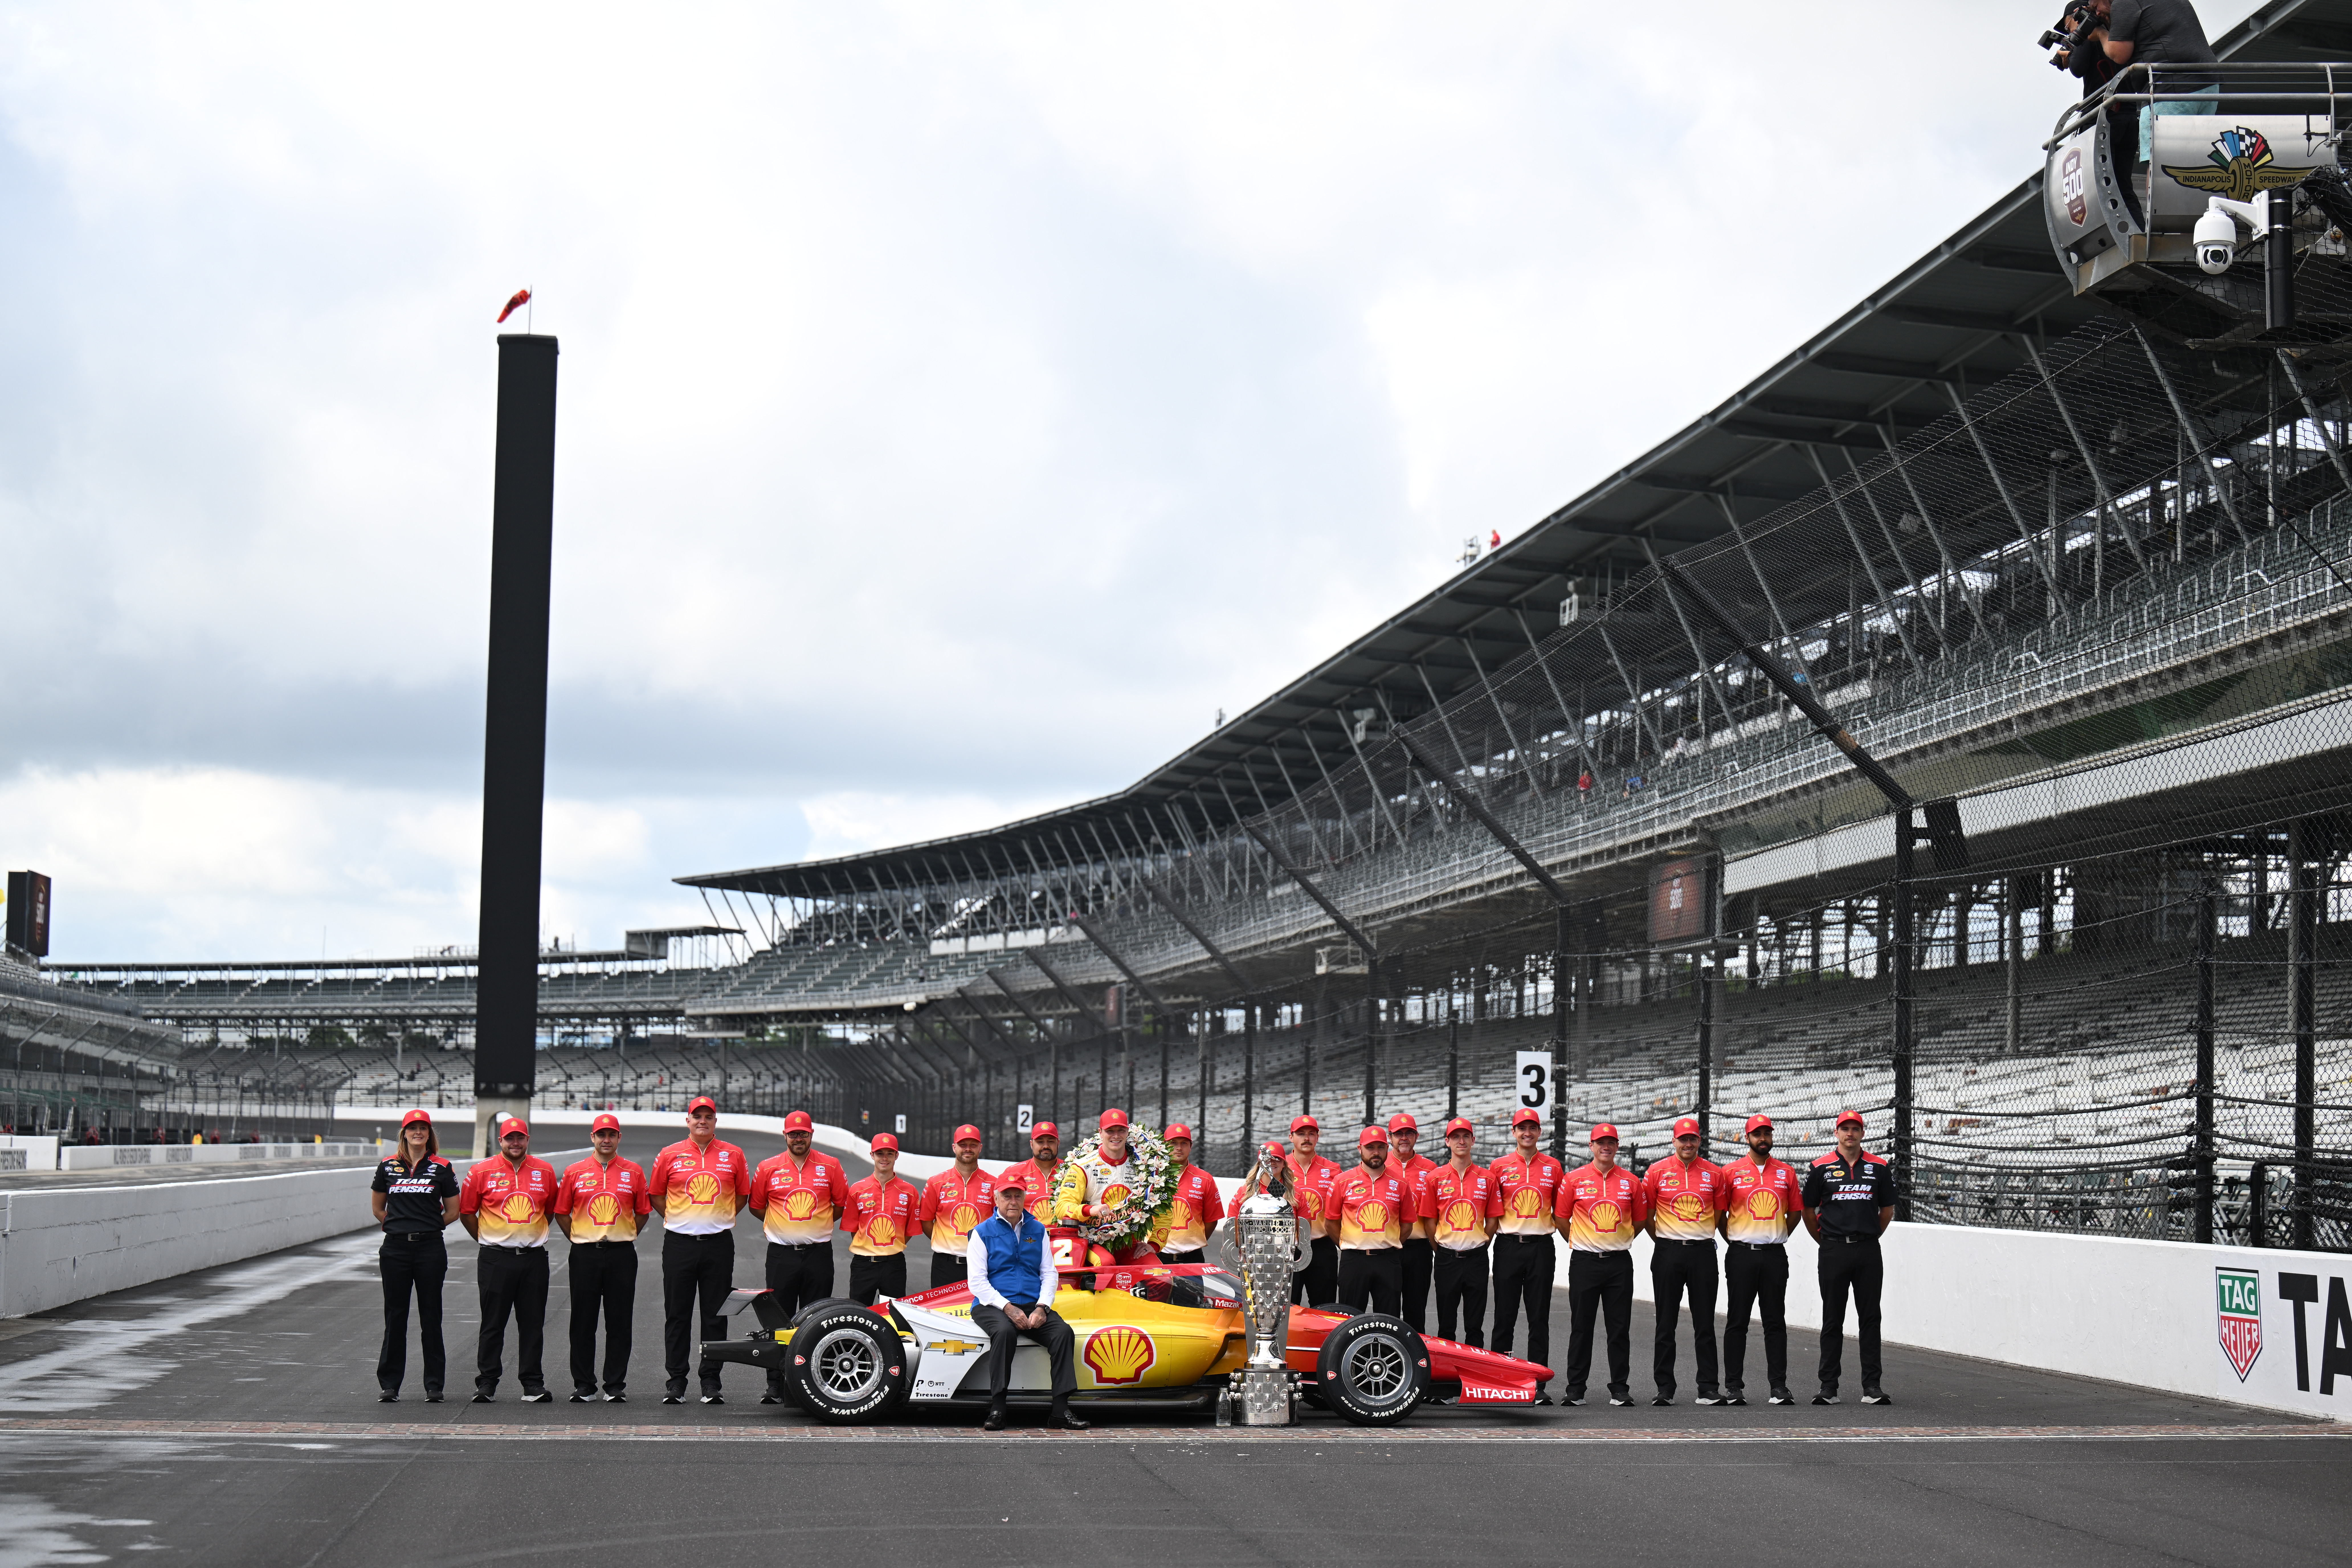 Visiting the Indianapolis Motor Speedway? What you need to know before heading to that track